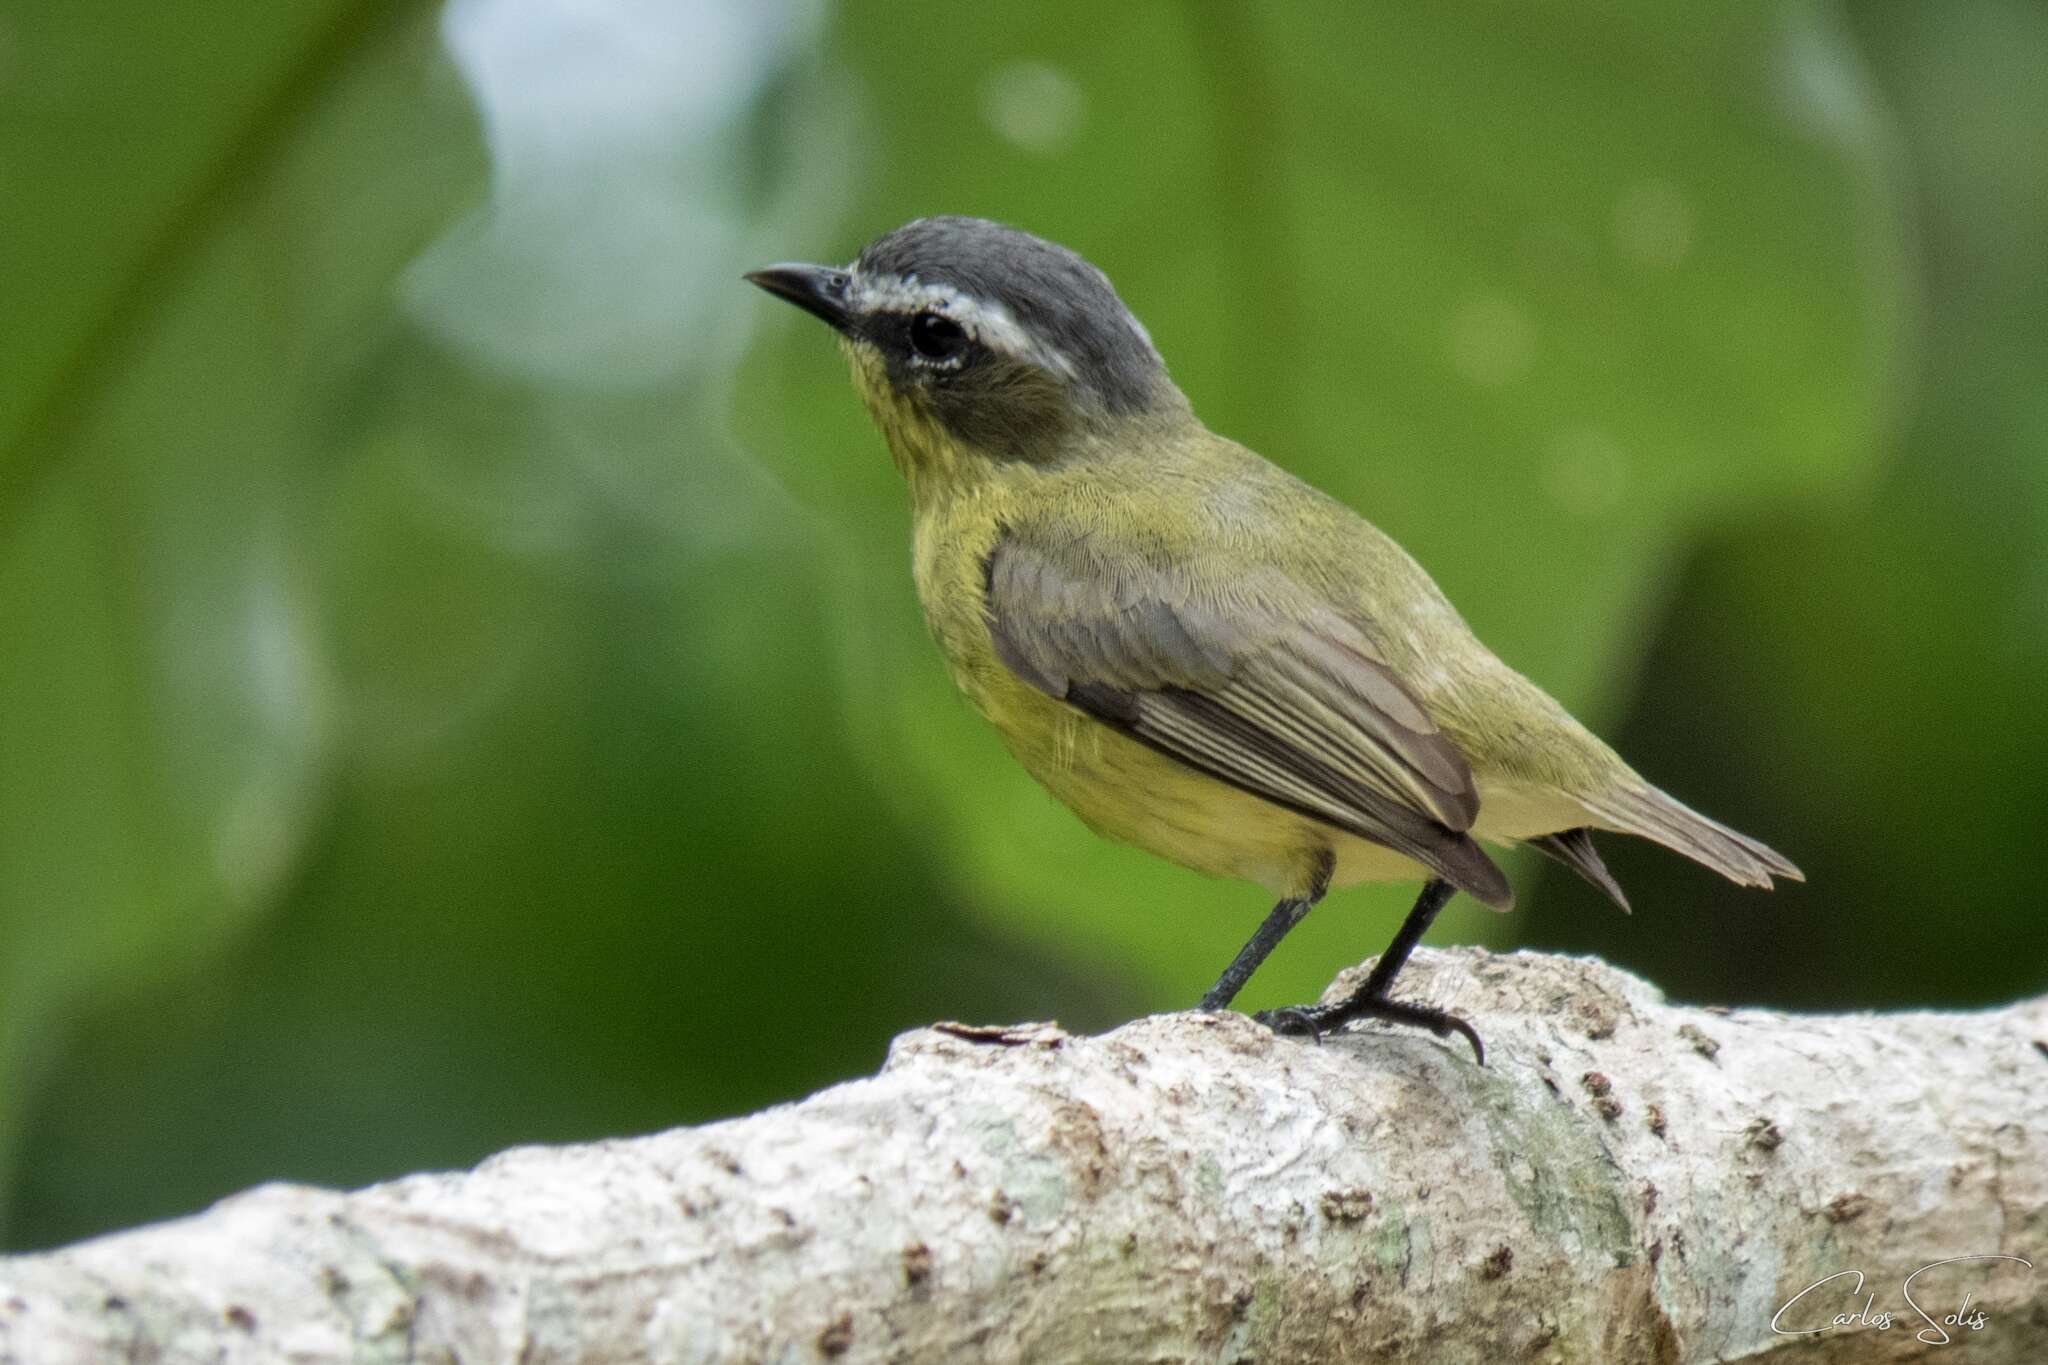 Image of Yellow-bellied Tyrannulet